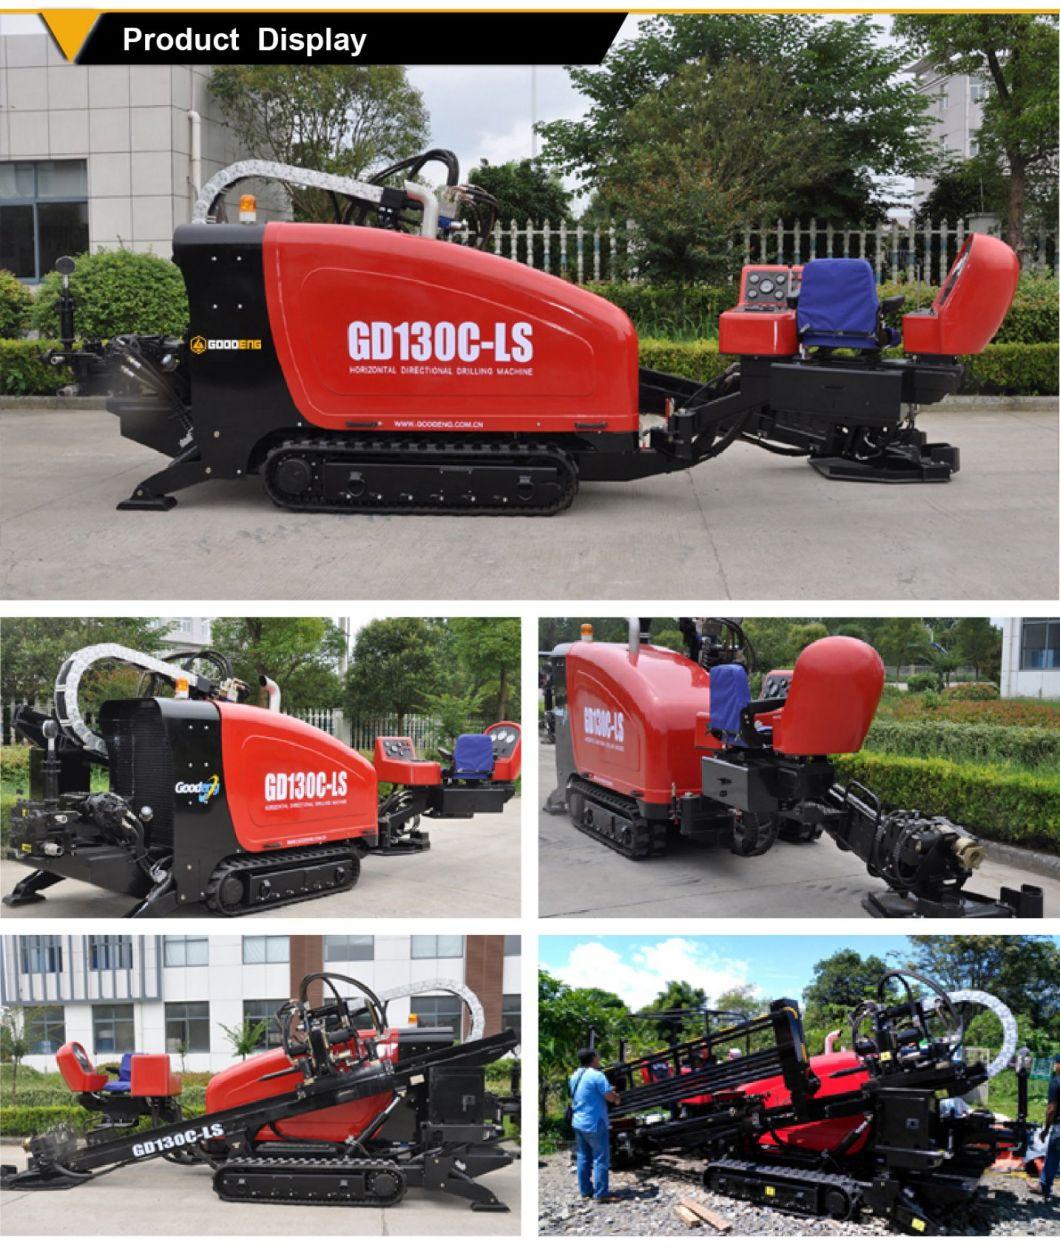 Goodeng 13T HDD machine large power and low noise